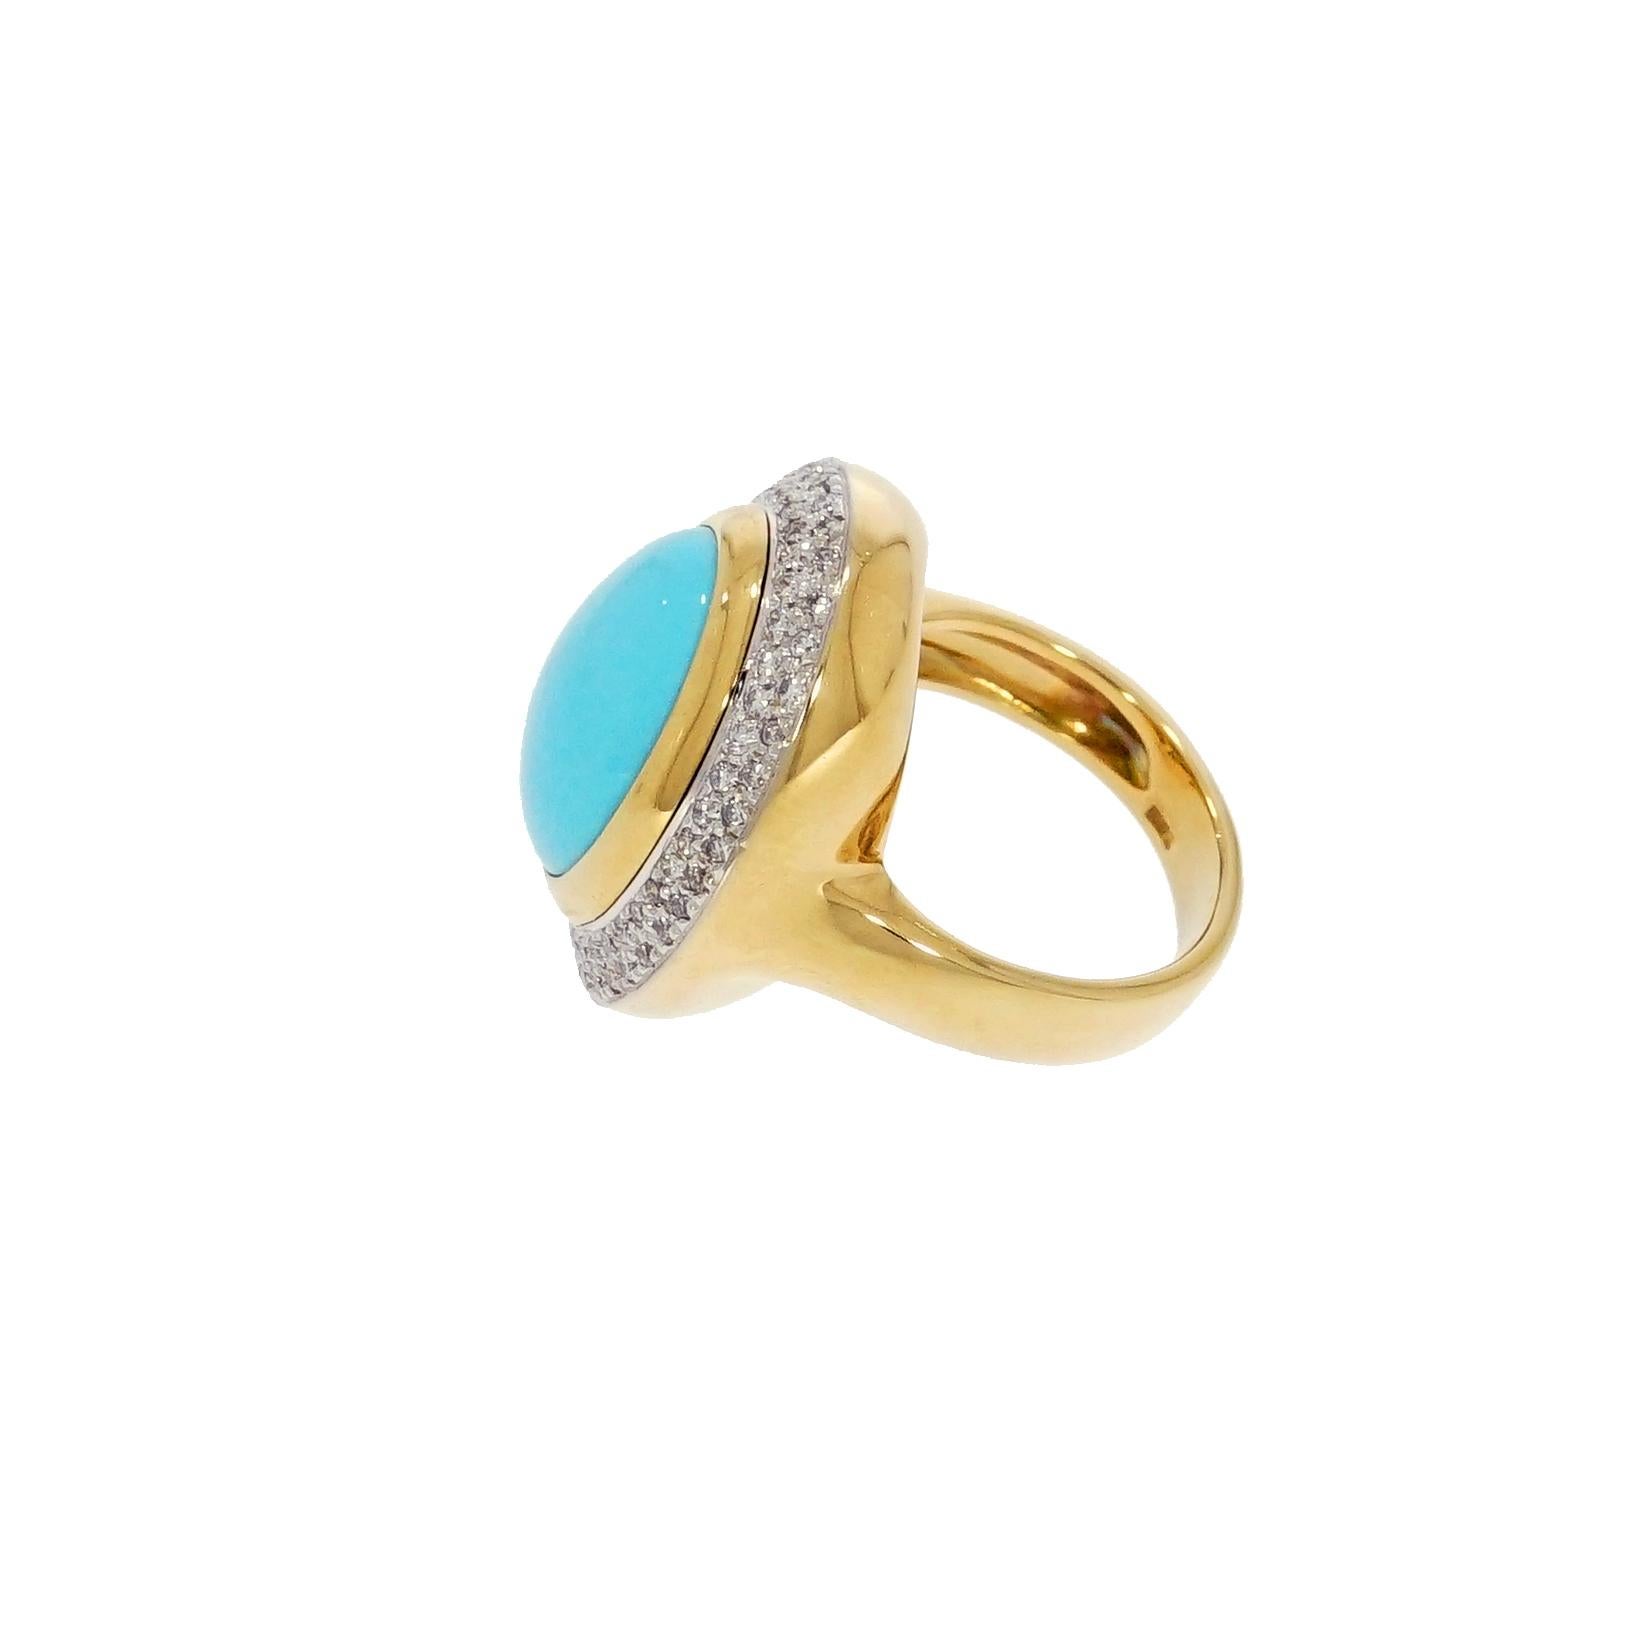 This alluring turquoise ring is centered with an oval cabochon-cut turquoise measuring 16x13mm, framed by a double row of pave-set round brilliant cut diamonds, weighing approx. 1.00 carats, the width of the band is 4.5mm.
The ring is in great